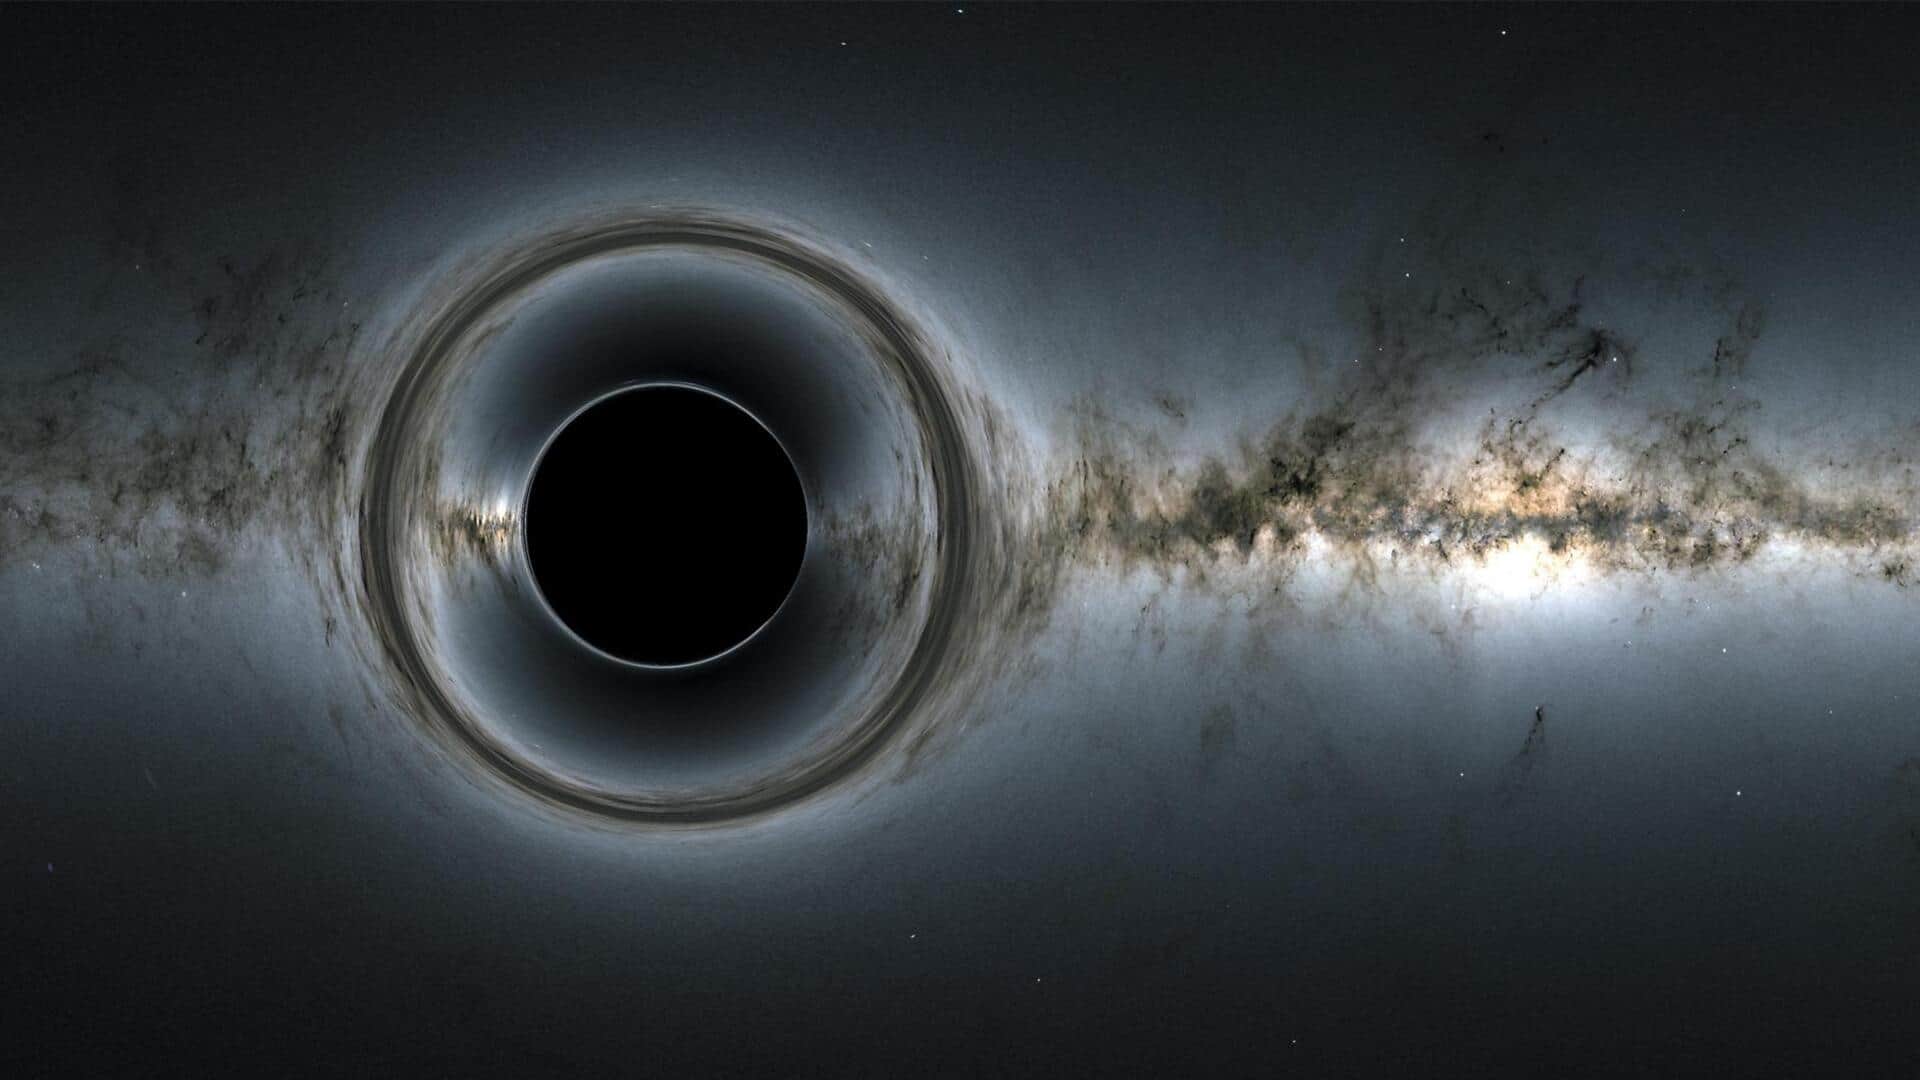 Earth's nearest supermassive black hole came alive 200 years ago